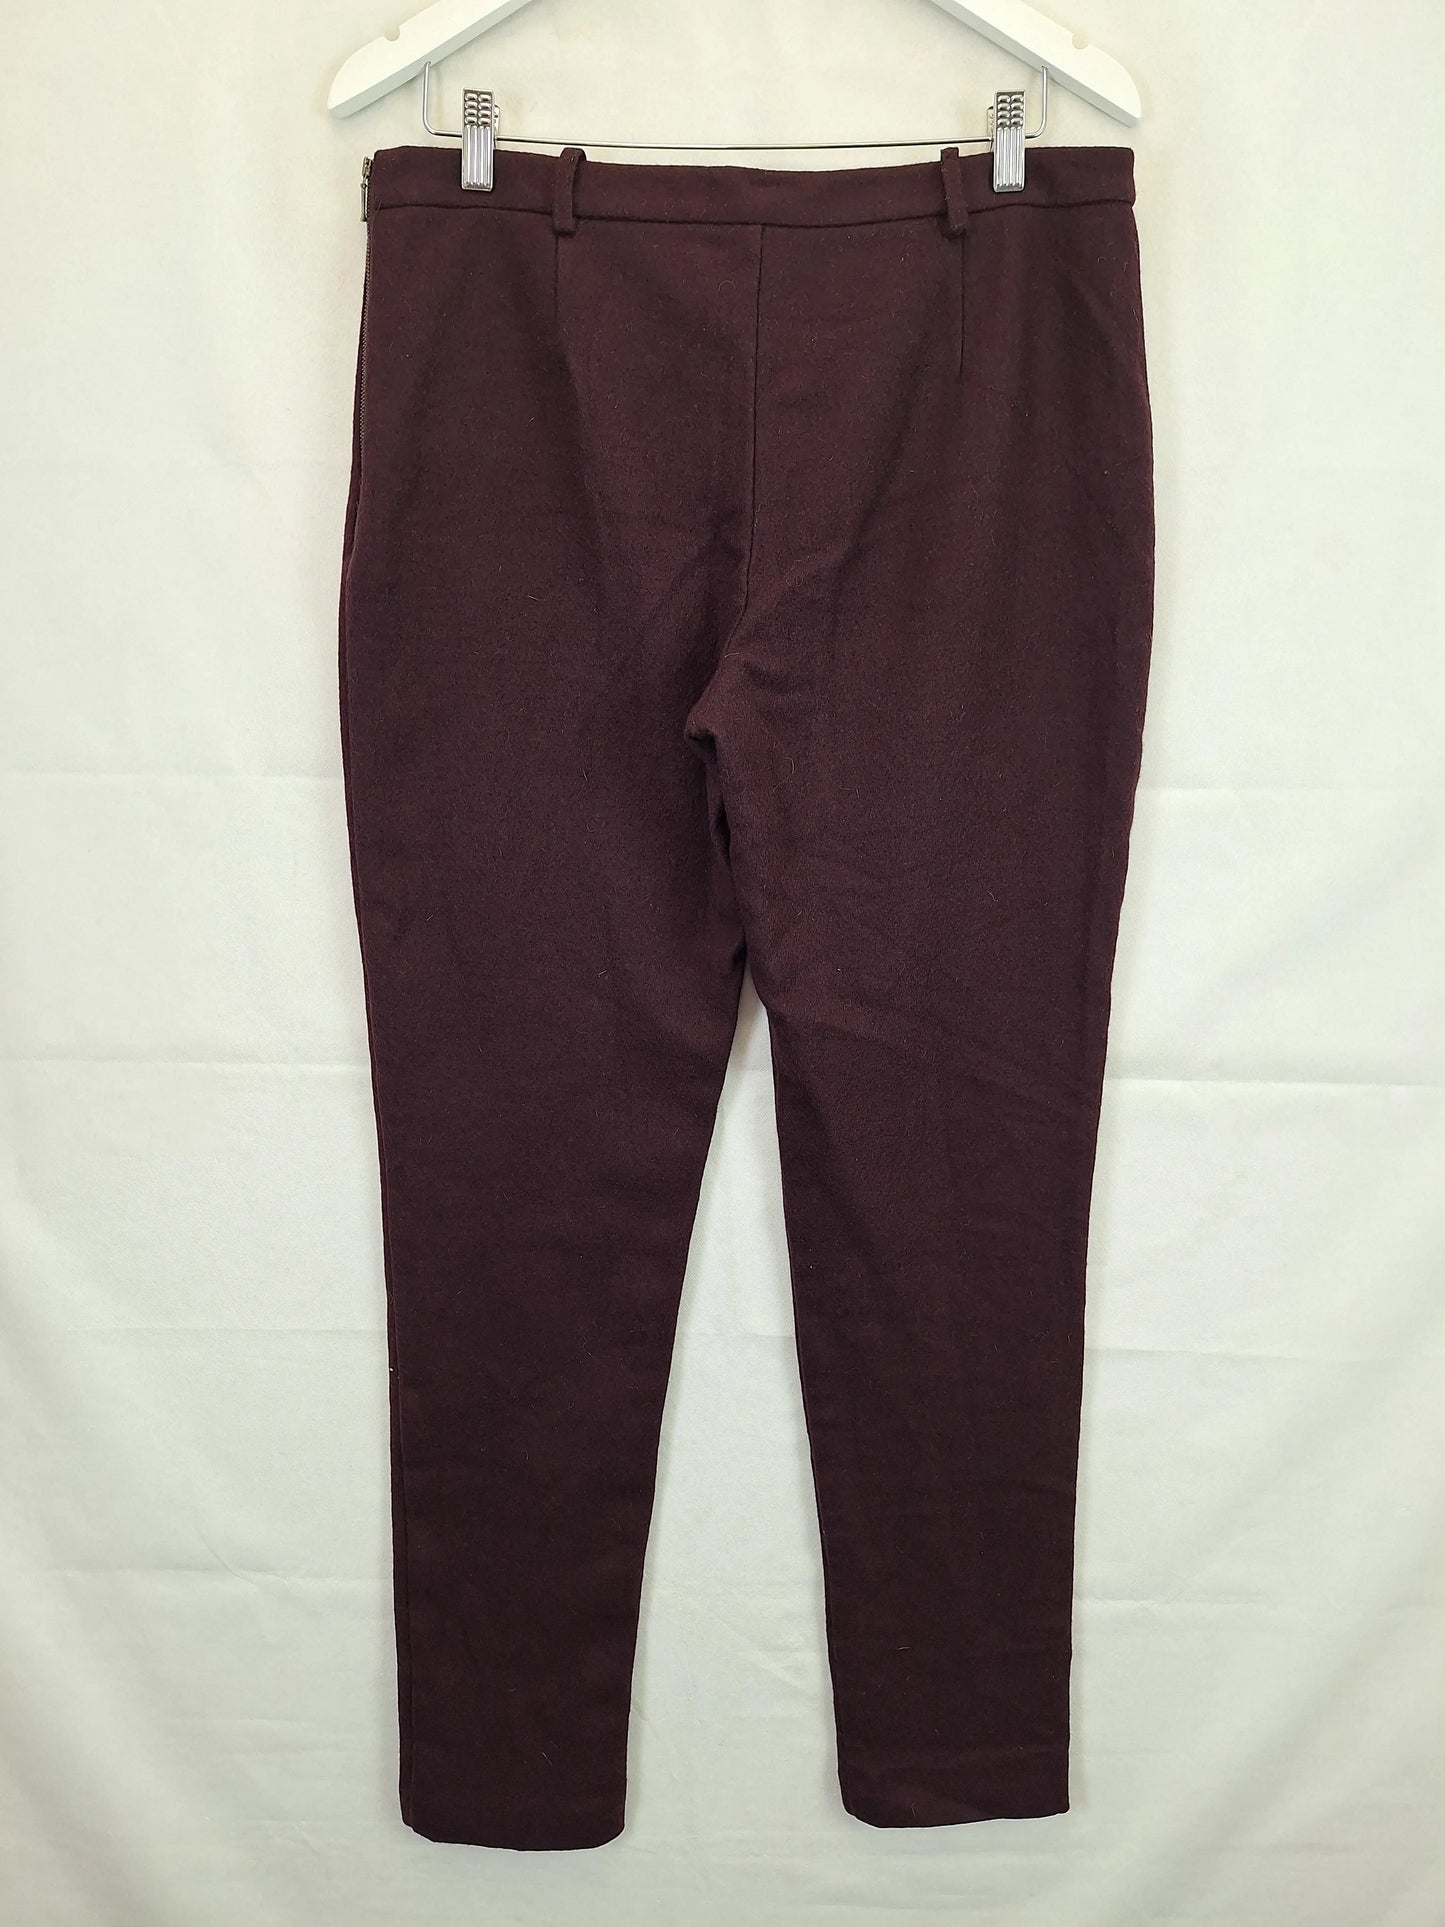 Saba Textured Mulberry Straight Leg Pants Size 14 by SwapUp-Online Second Hand Store-Online Thrift Store